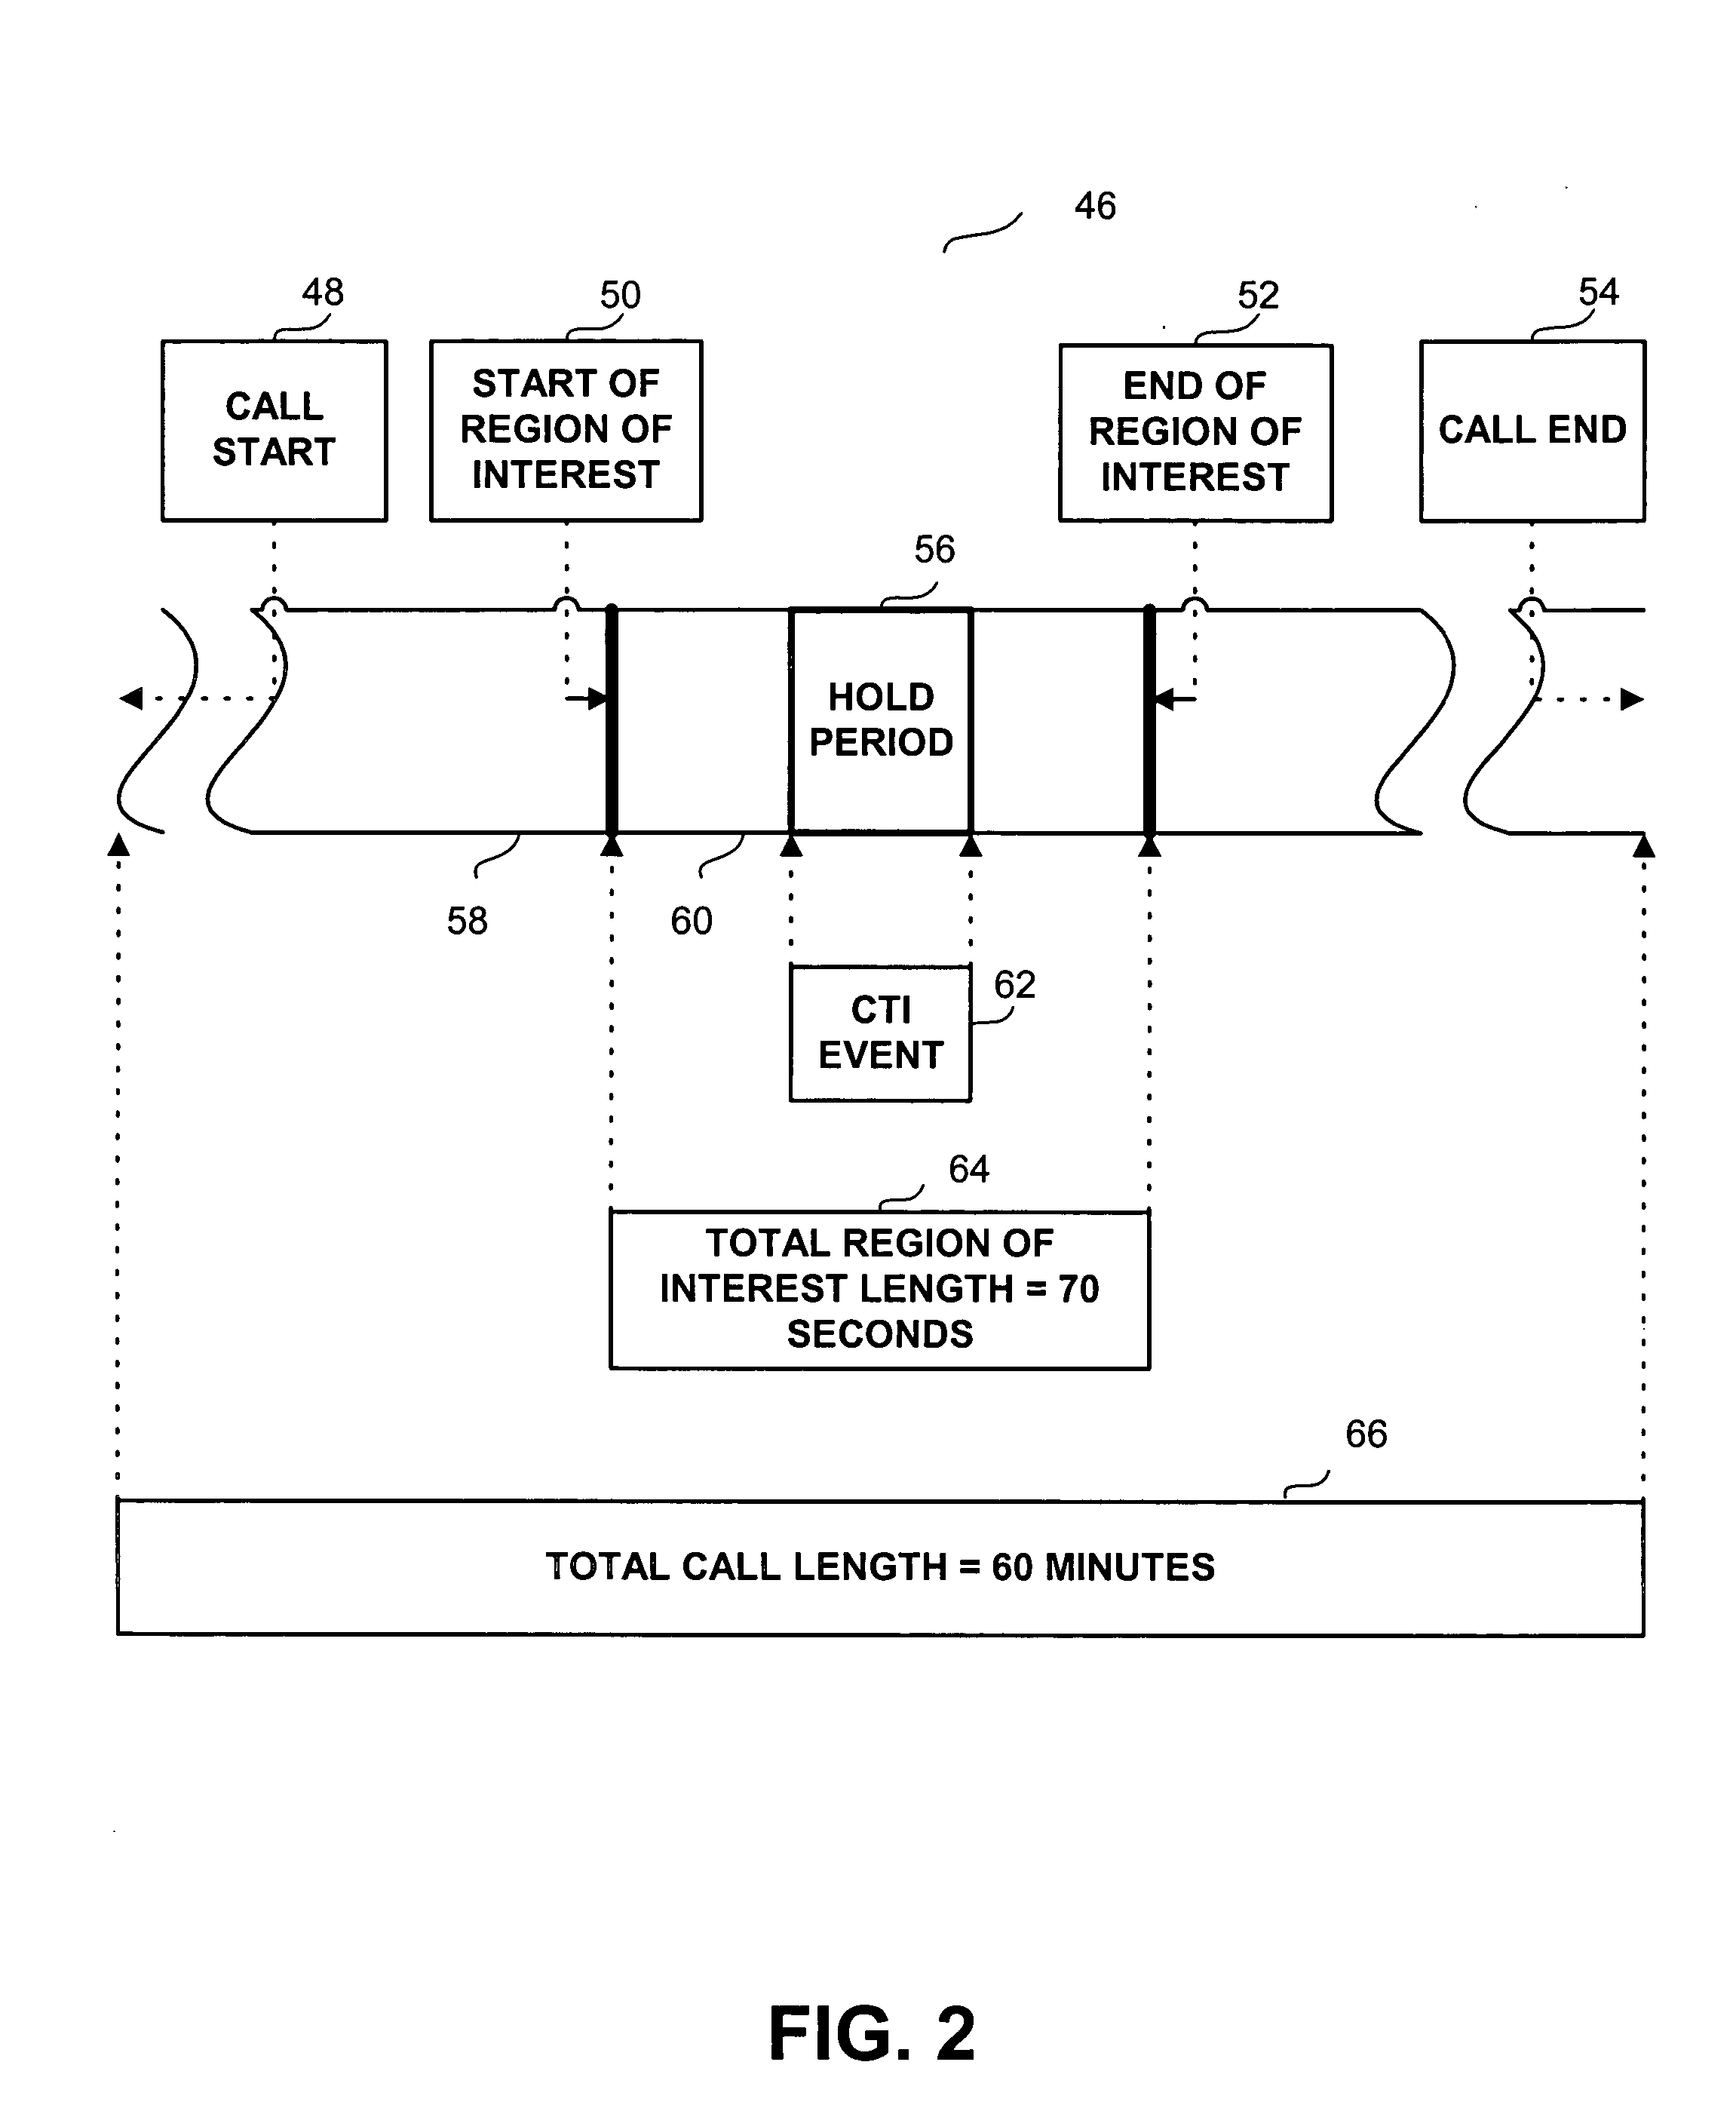 Apparatus and method for event-driven content analysis